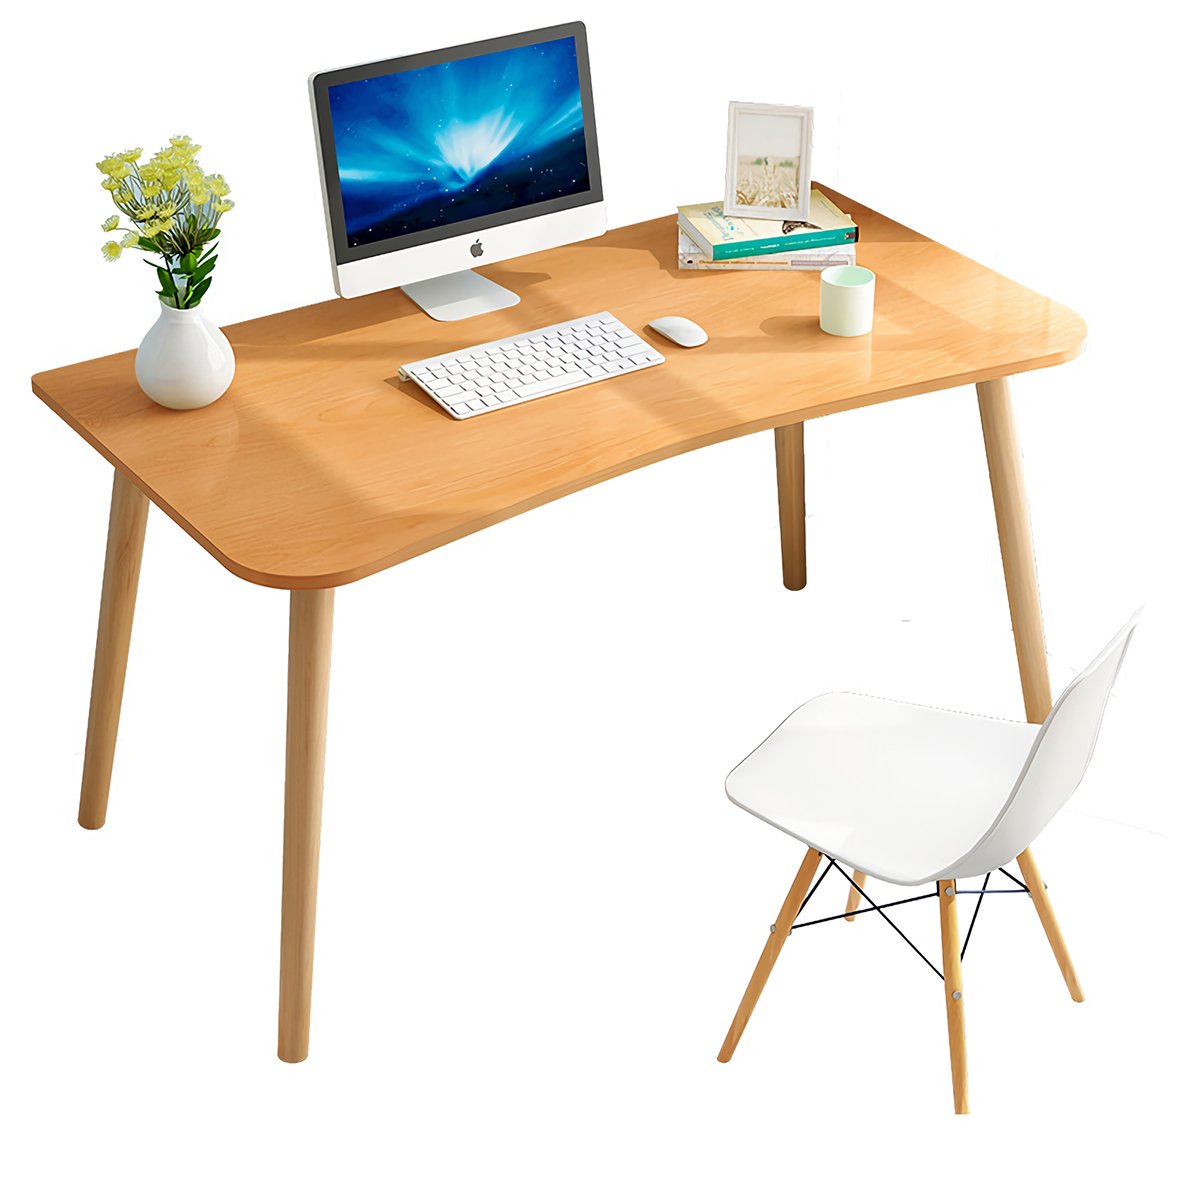 

Wooden Computer Desk Modern Simple Learning Study Table Writing Table Arc Corner Table with Drawer for Home Office Bedro